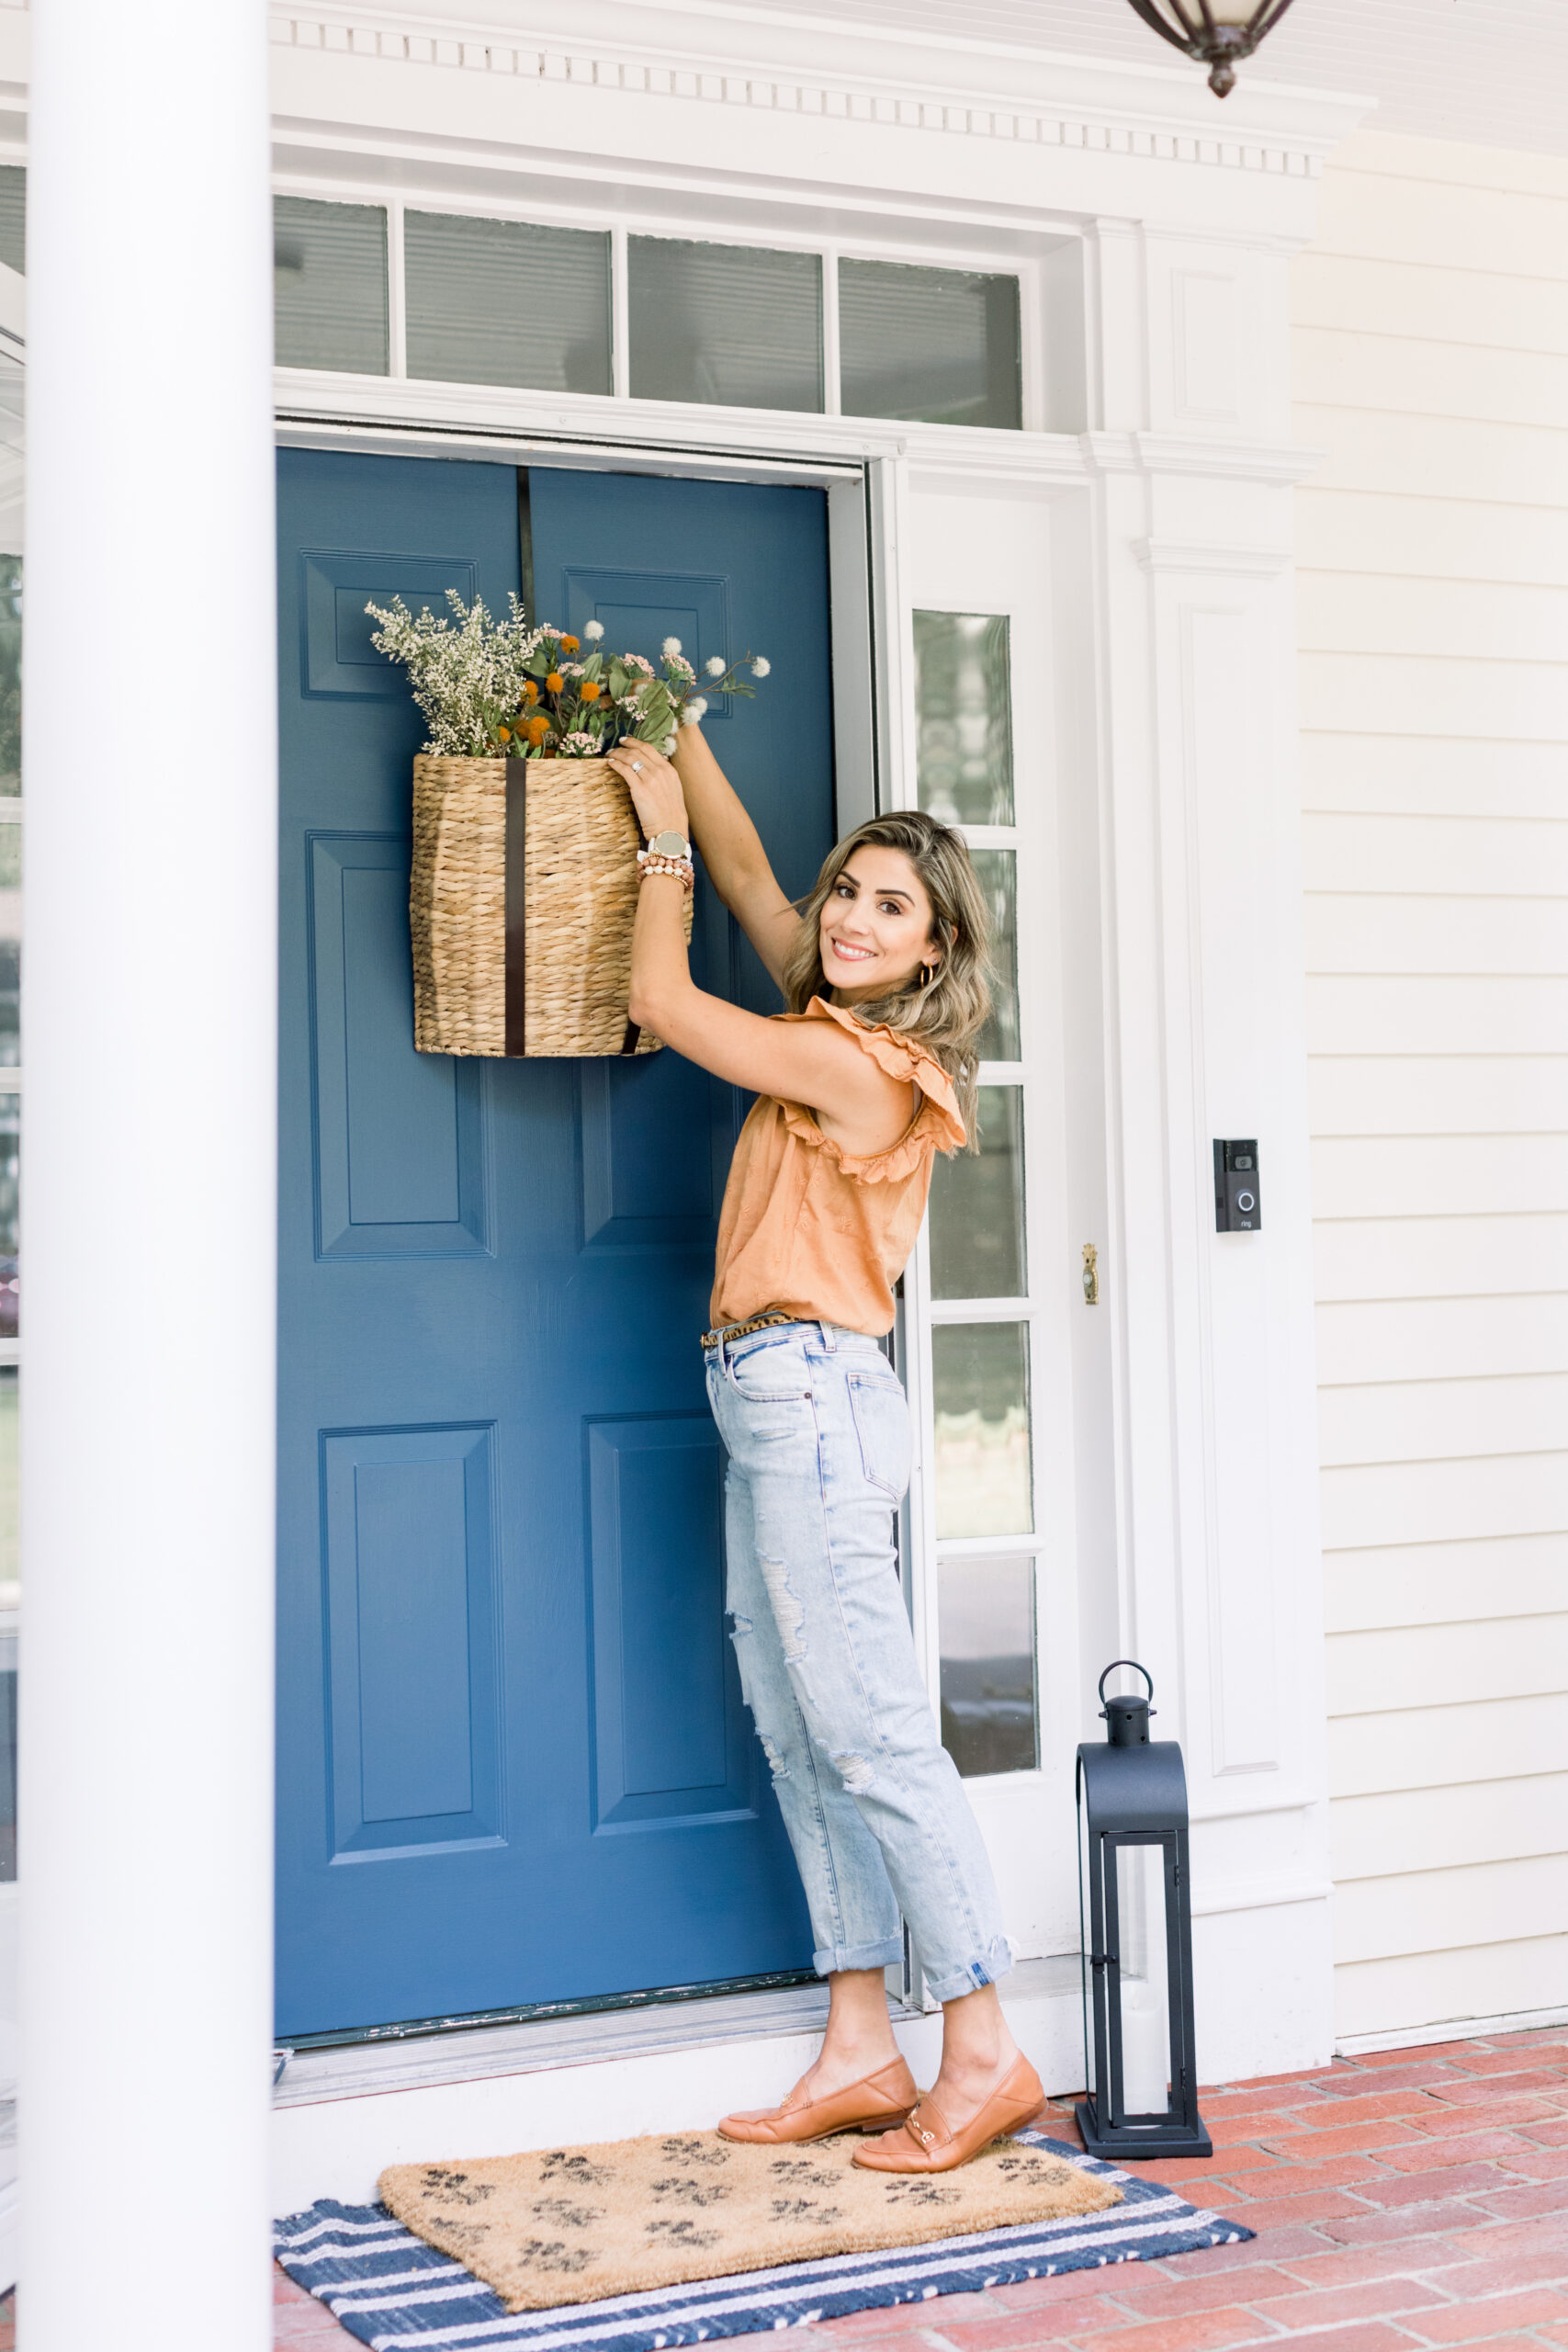 Connecticut life and style blogger Lauren McBride shares the launch of her harvest collection for her self-named QVC line.